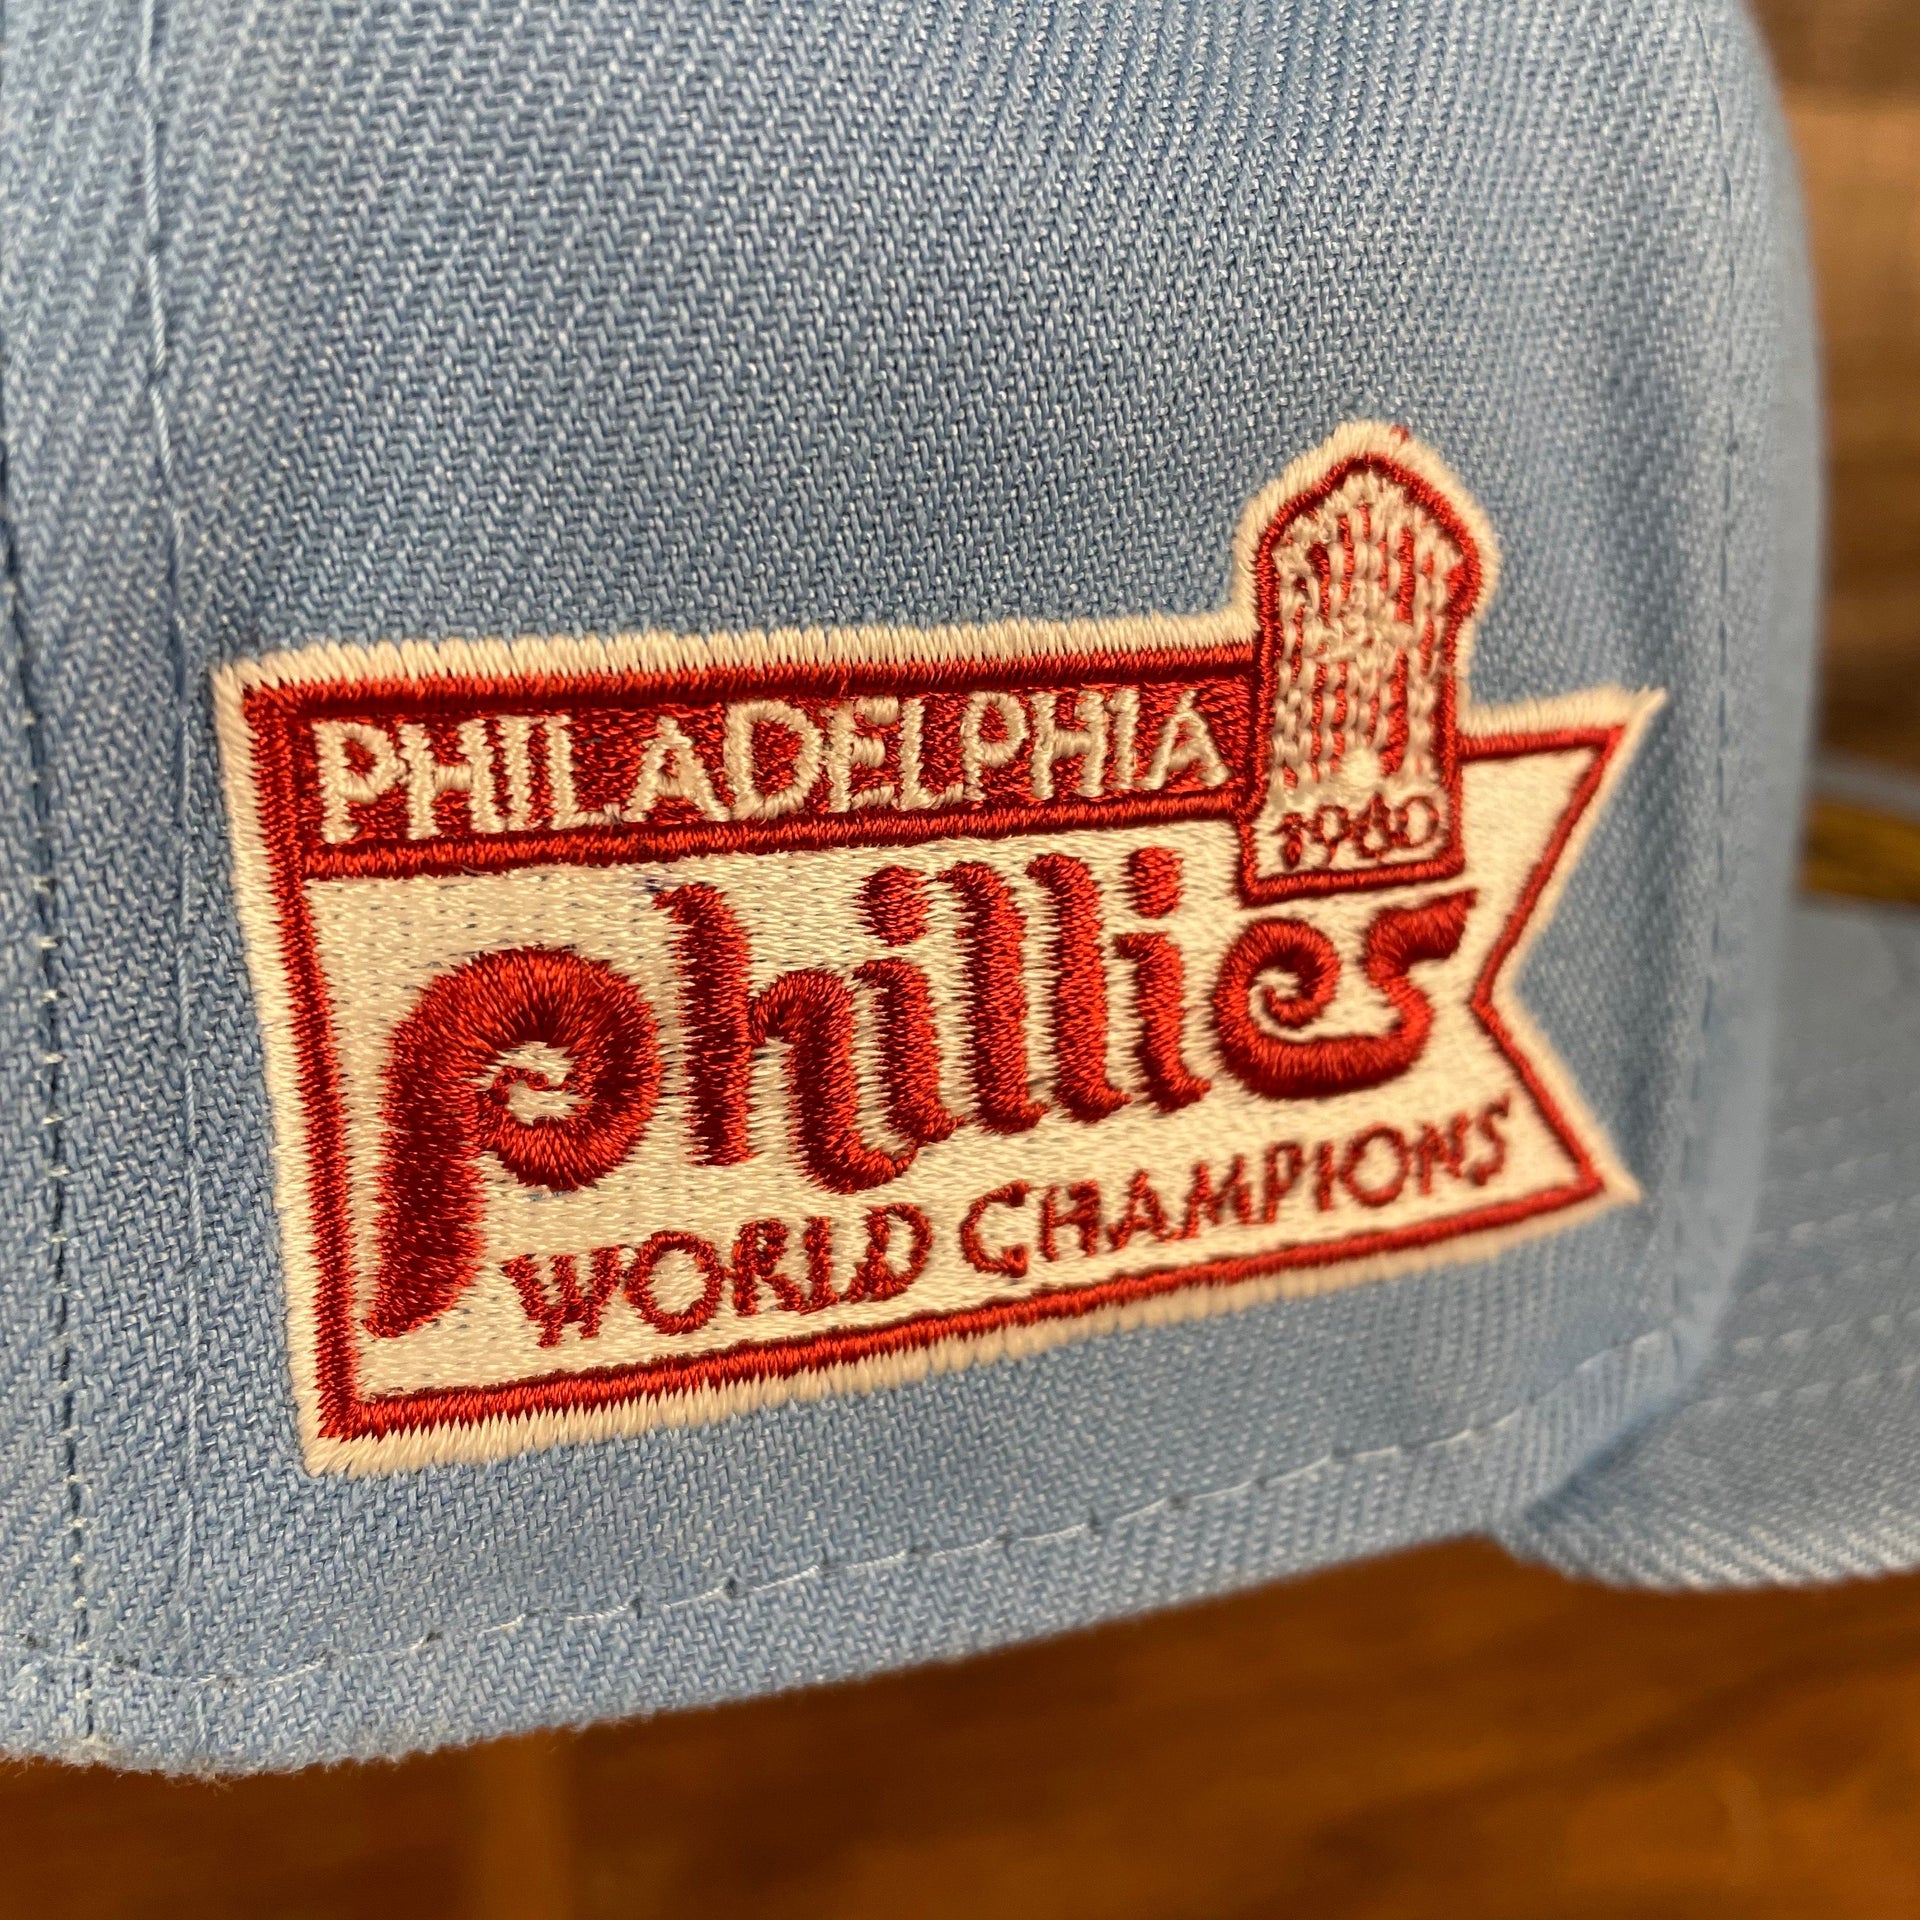 Close up of the 1980 Phillies World Champions Side Patch on the Philadelphia Phillies 1980 World Champions Side Patch Cooperstown Quaker Logo Maroon Bottom Sky 59Fifty Fitted Cap